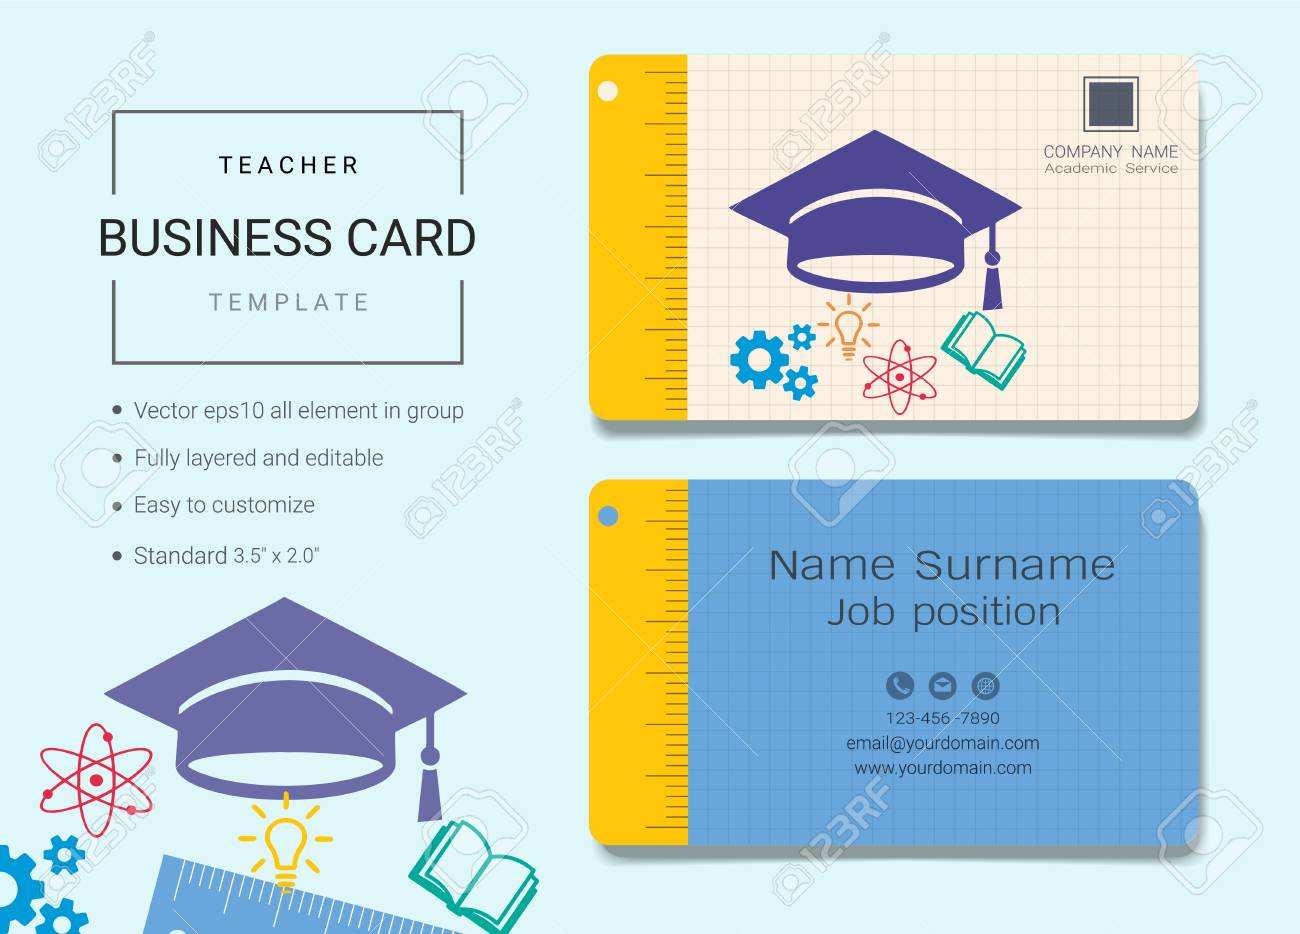 88 Report Education Name Card Template in Photoshop by Education Name Card Template